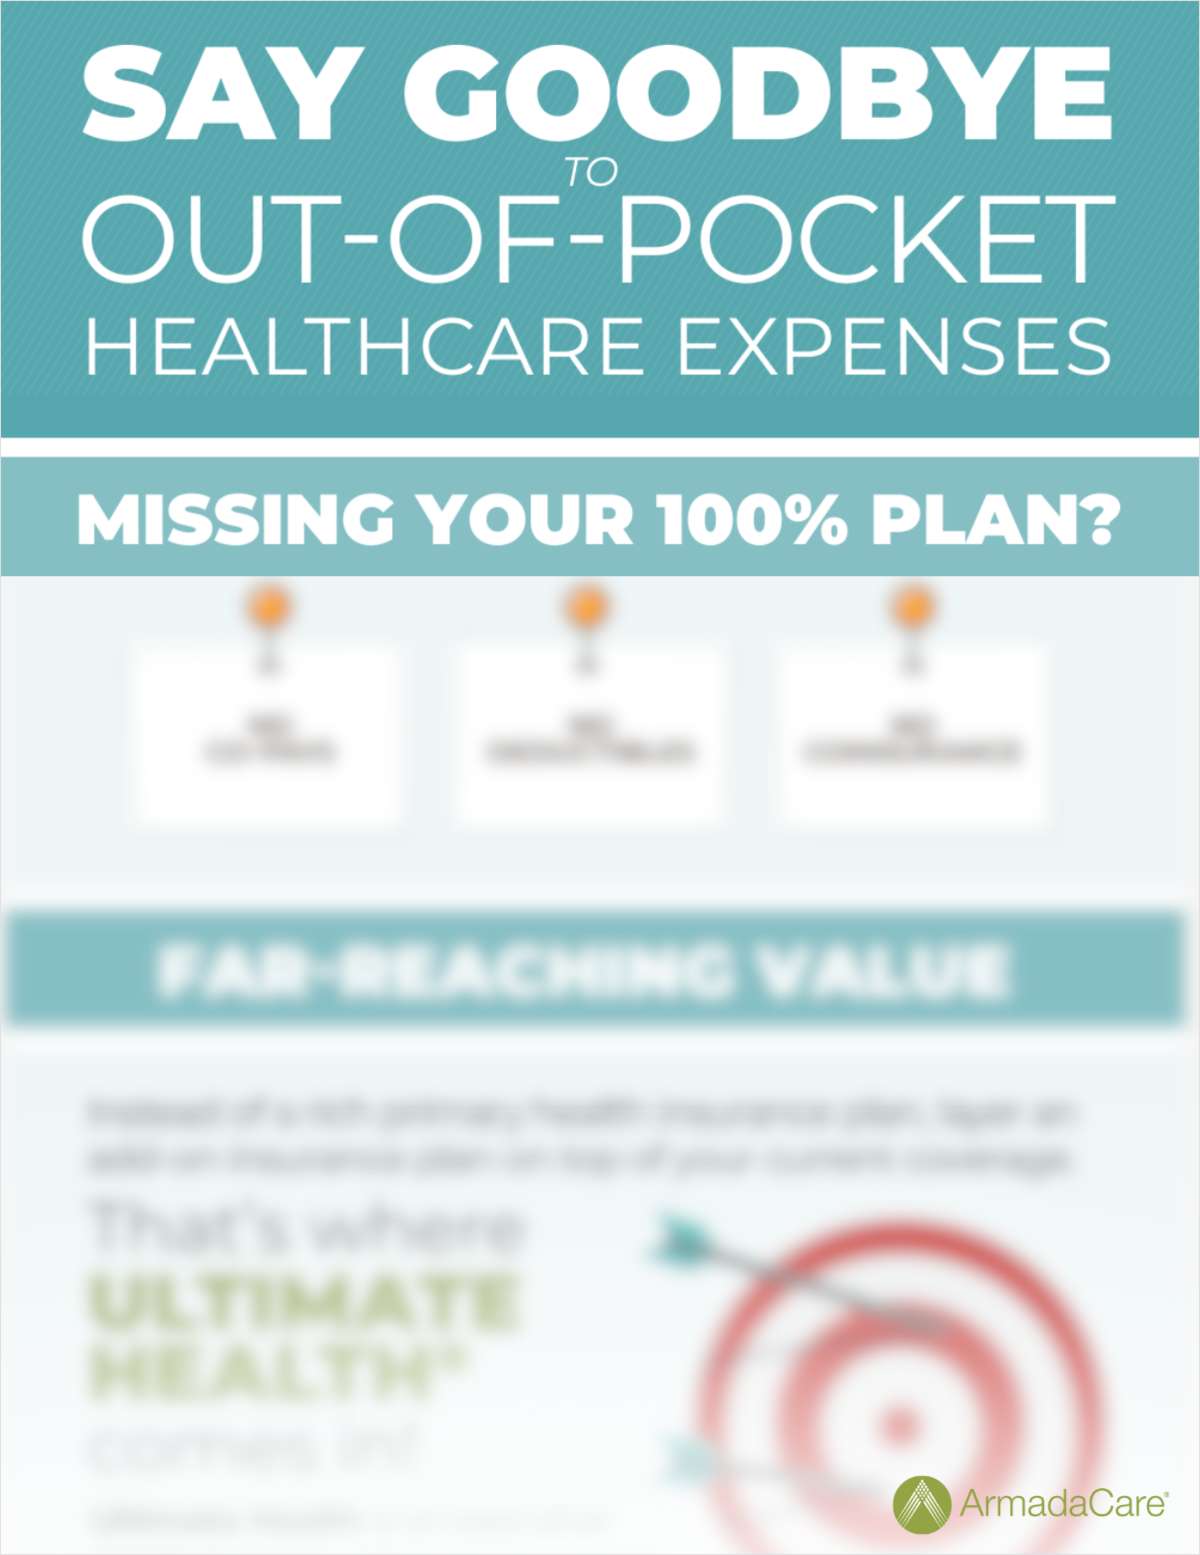 Say Goodbye to Out-of-Pocket Medical Expenses